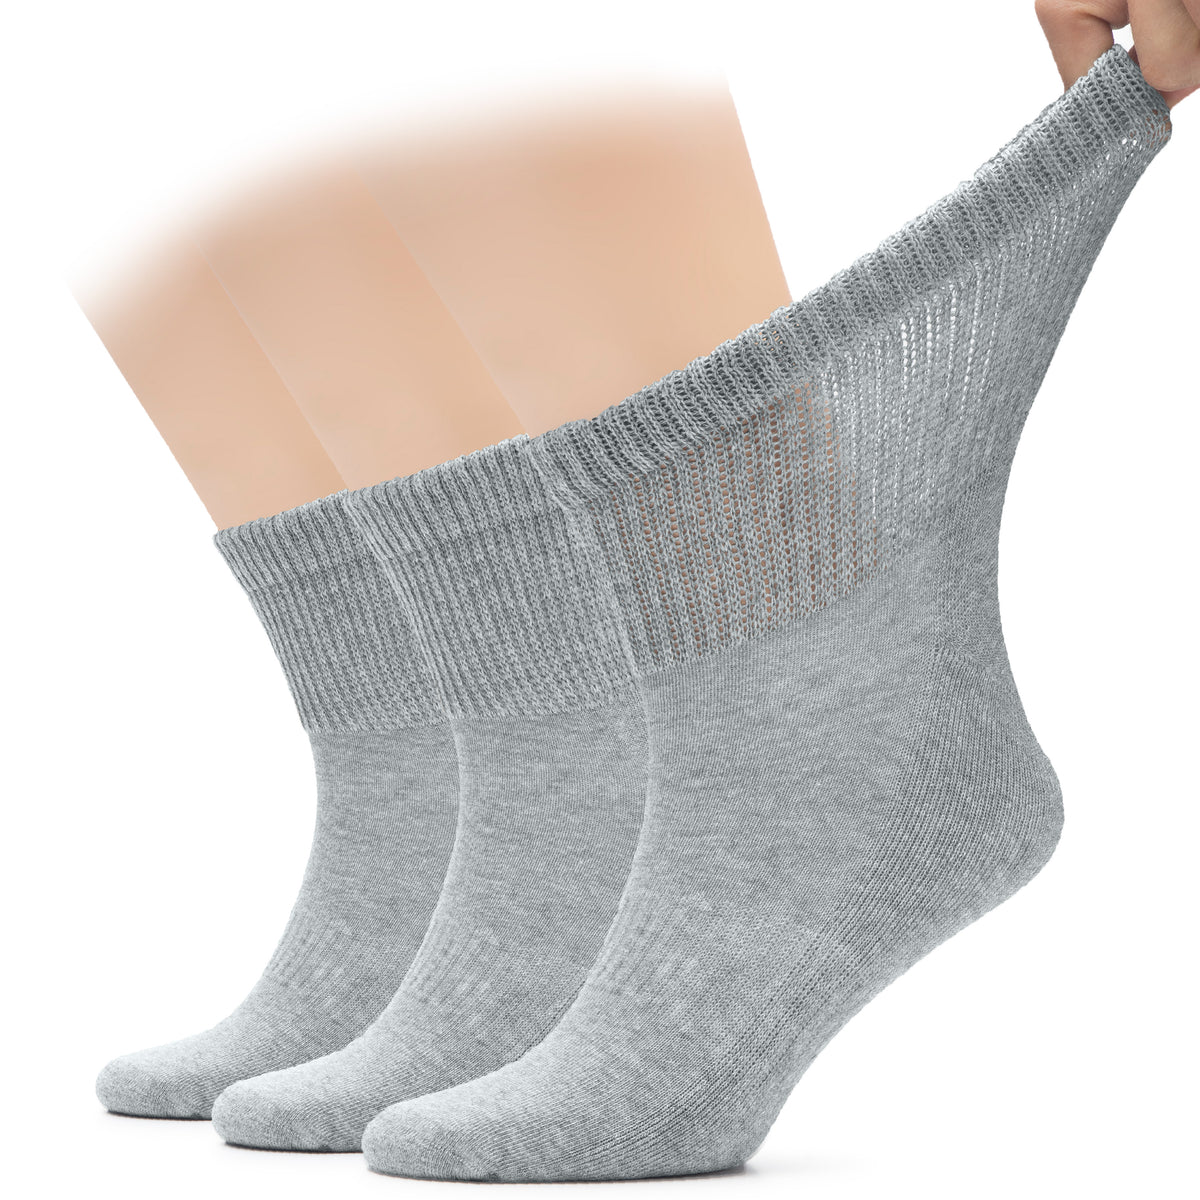 This image depicts three pairs of gray Men's Diabetic Ankle Socks, suitable for everyday wear.